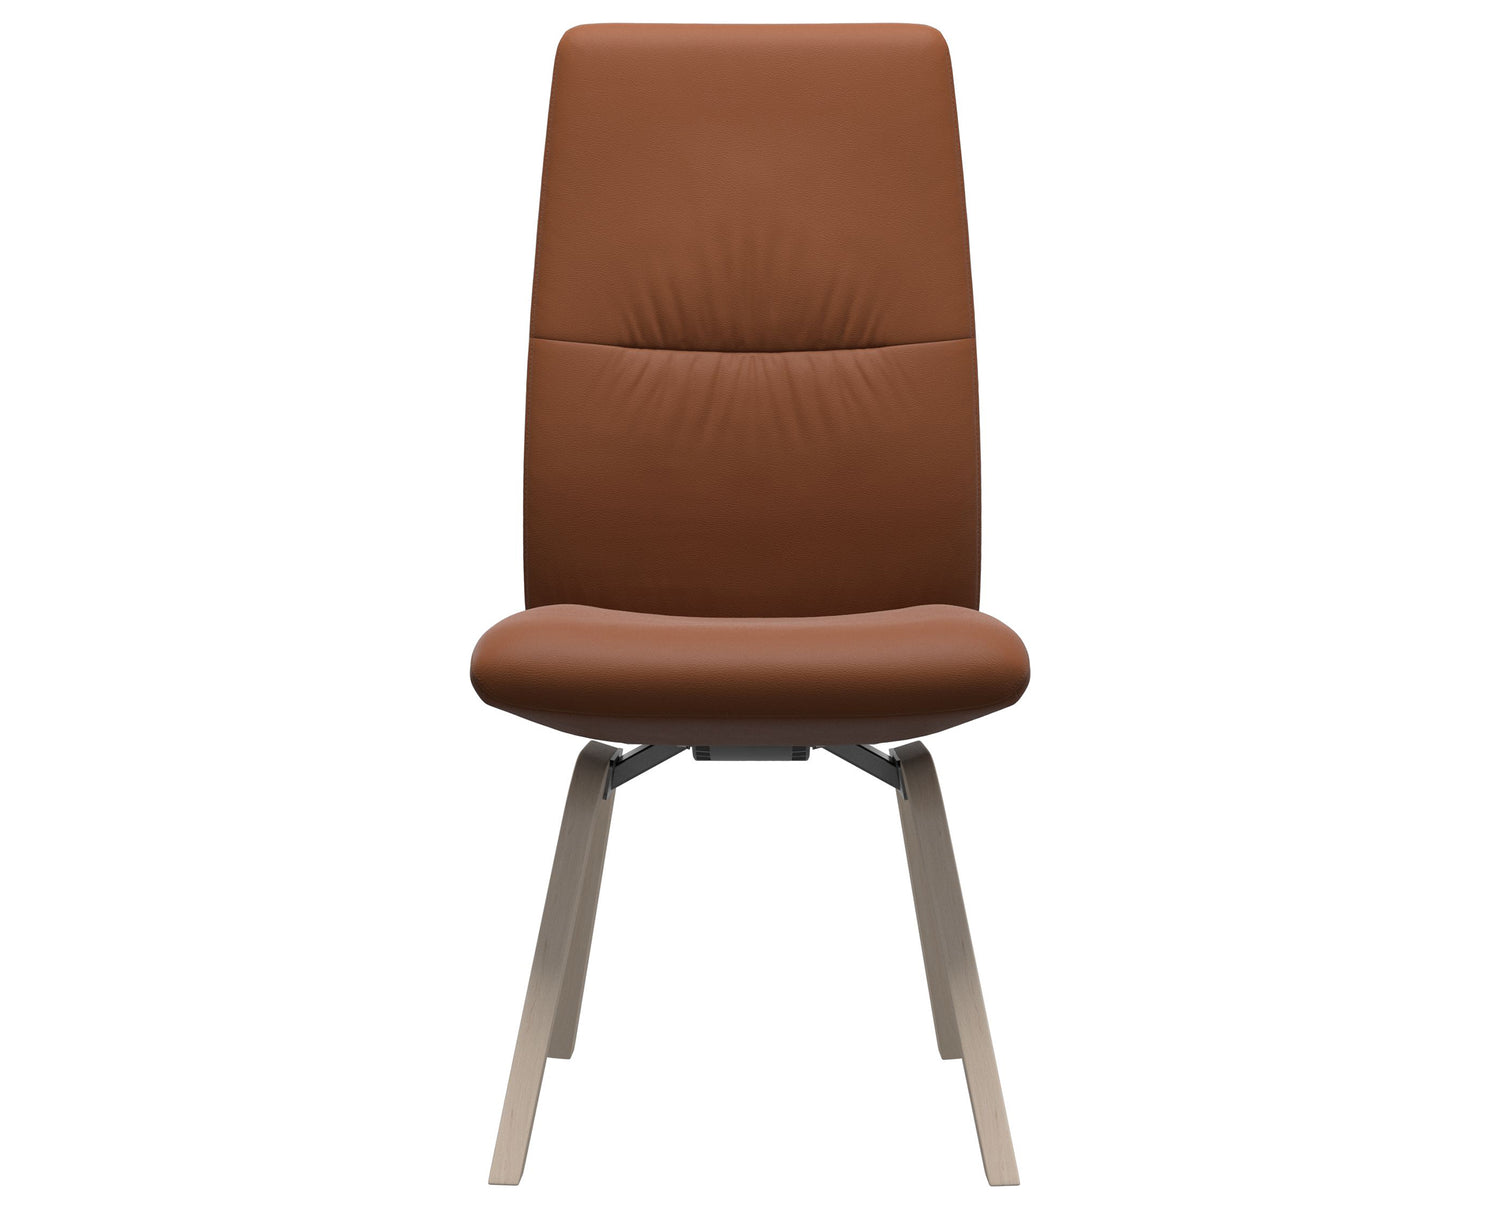 Paloma Leather New Cognac & Whitewash Base | Stressless Mint High Back D200 Dining Chair | Valley Ridge Furniture